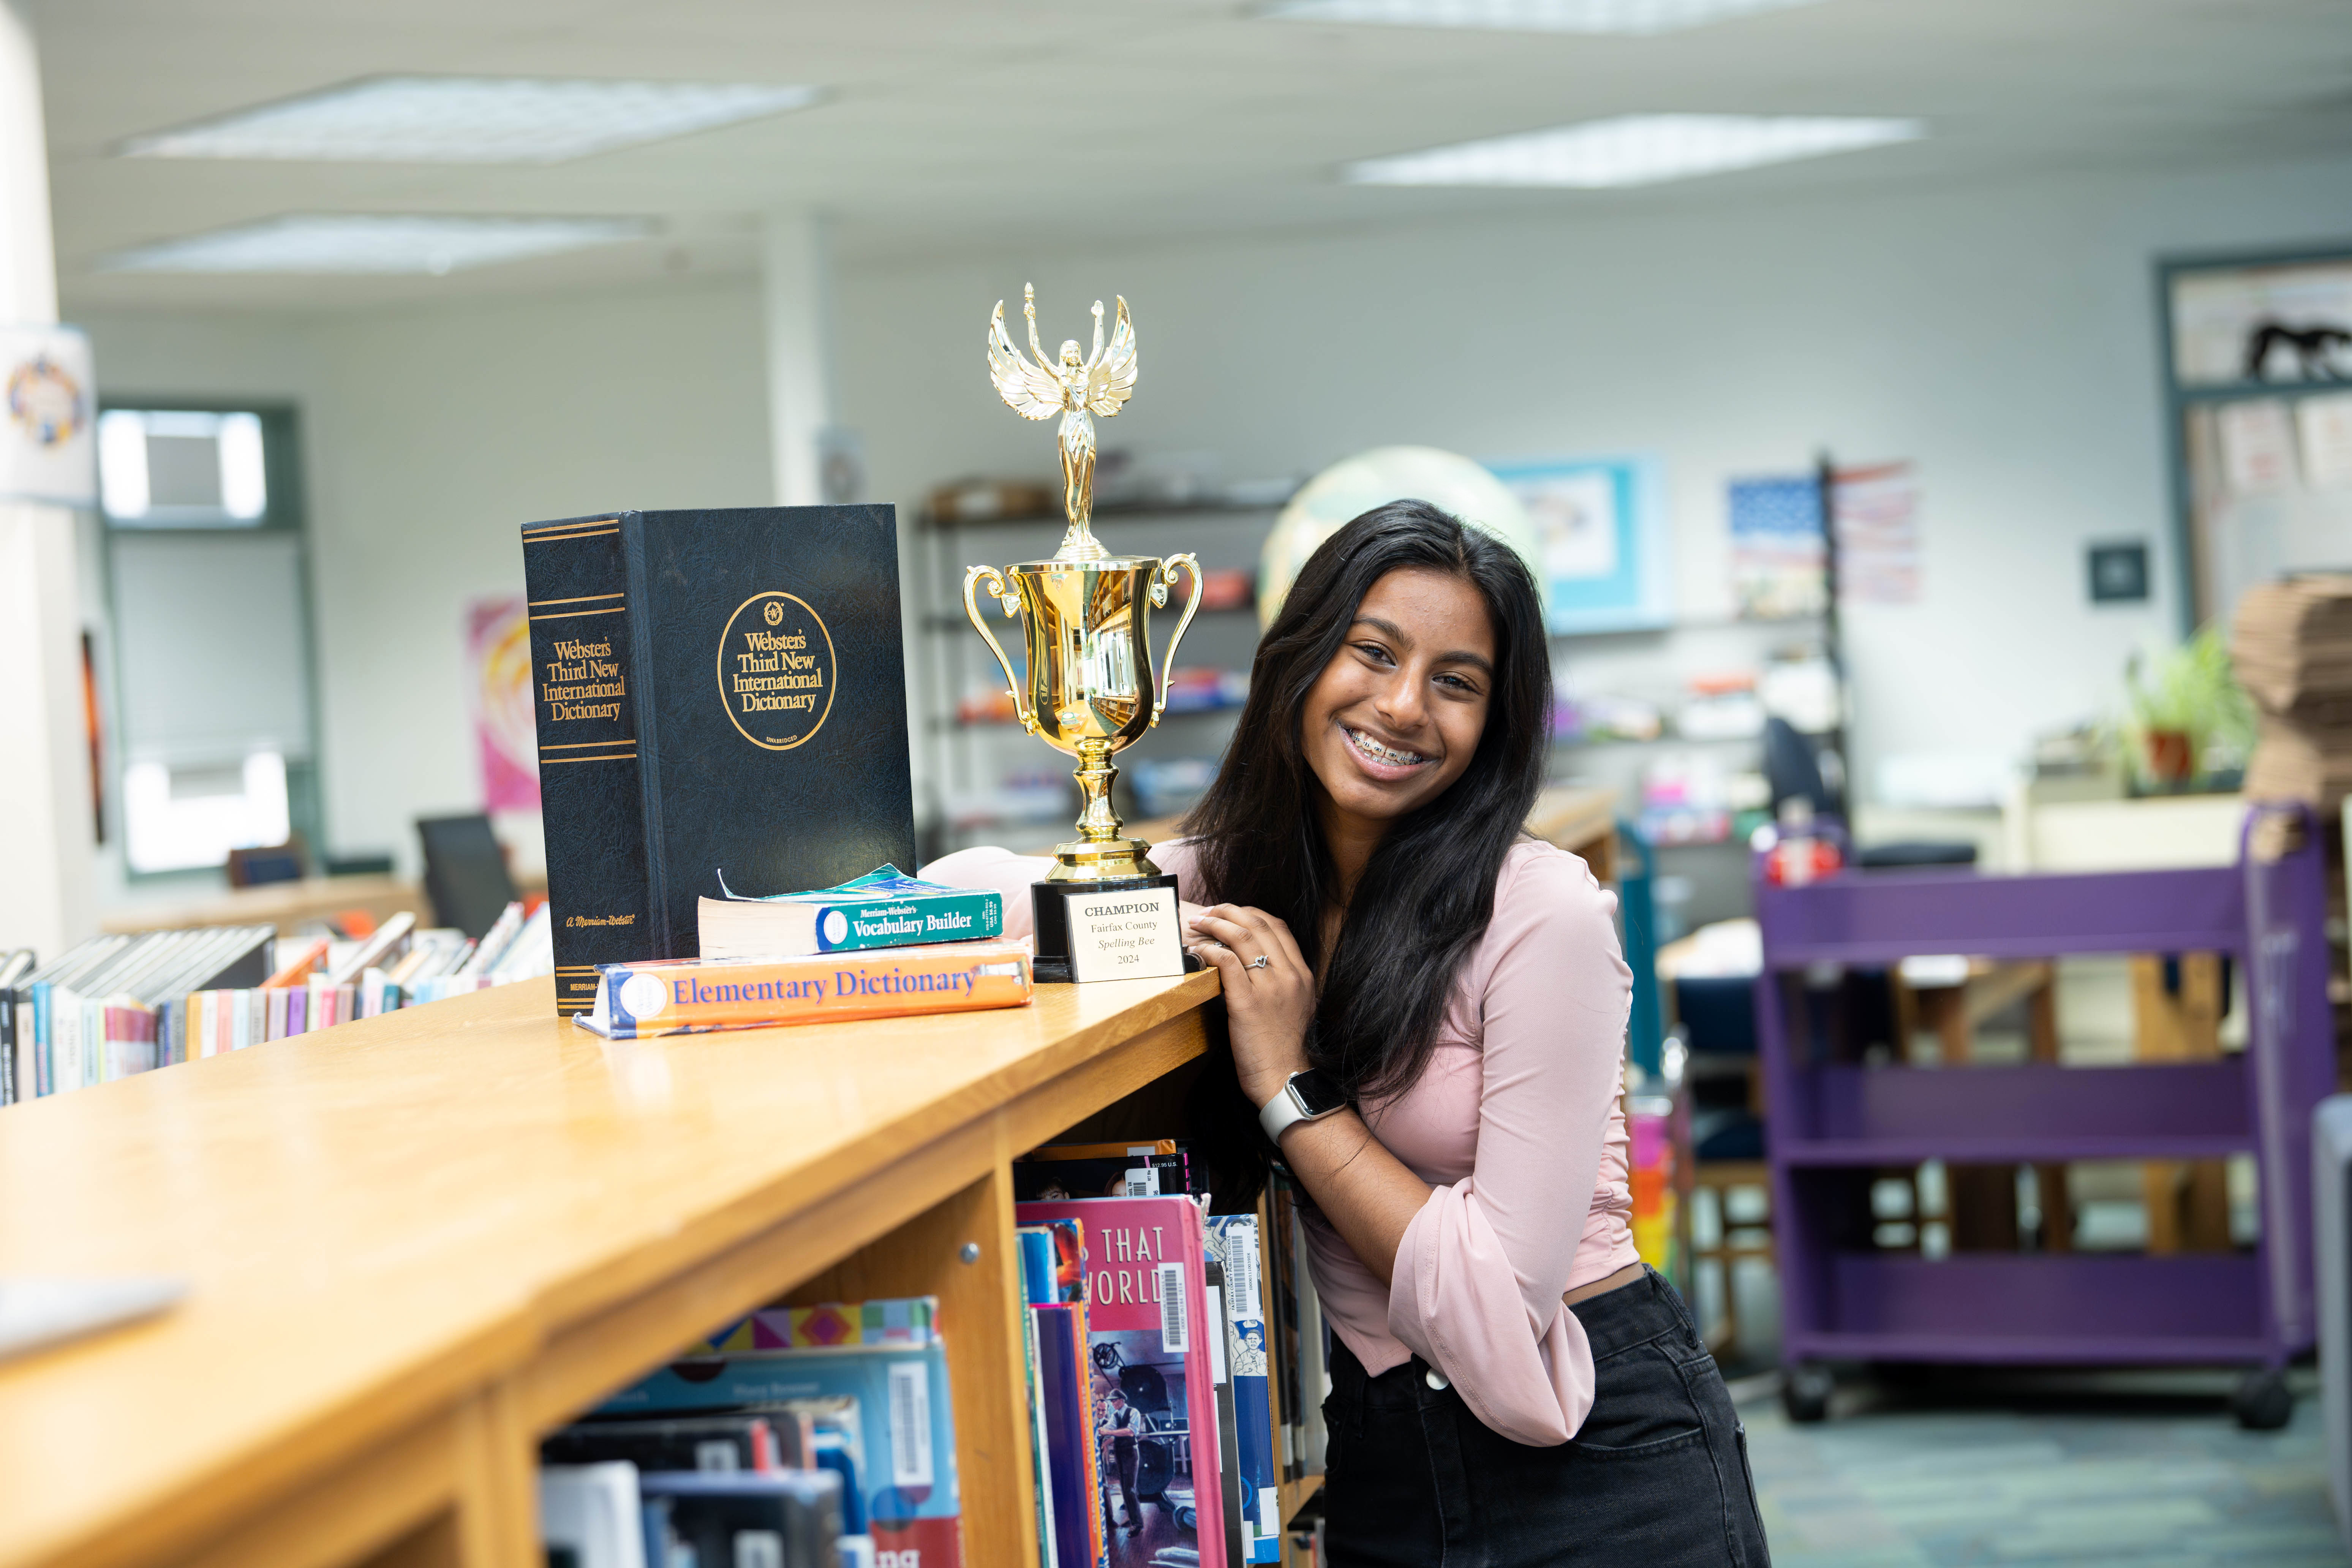 Rachel Carson seventh grader Ankita Balaji smiles as she leans on a short bookshelf. On top of the bookshelf are three dictionaries and a trophy.